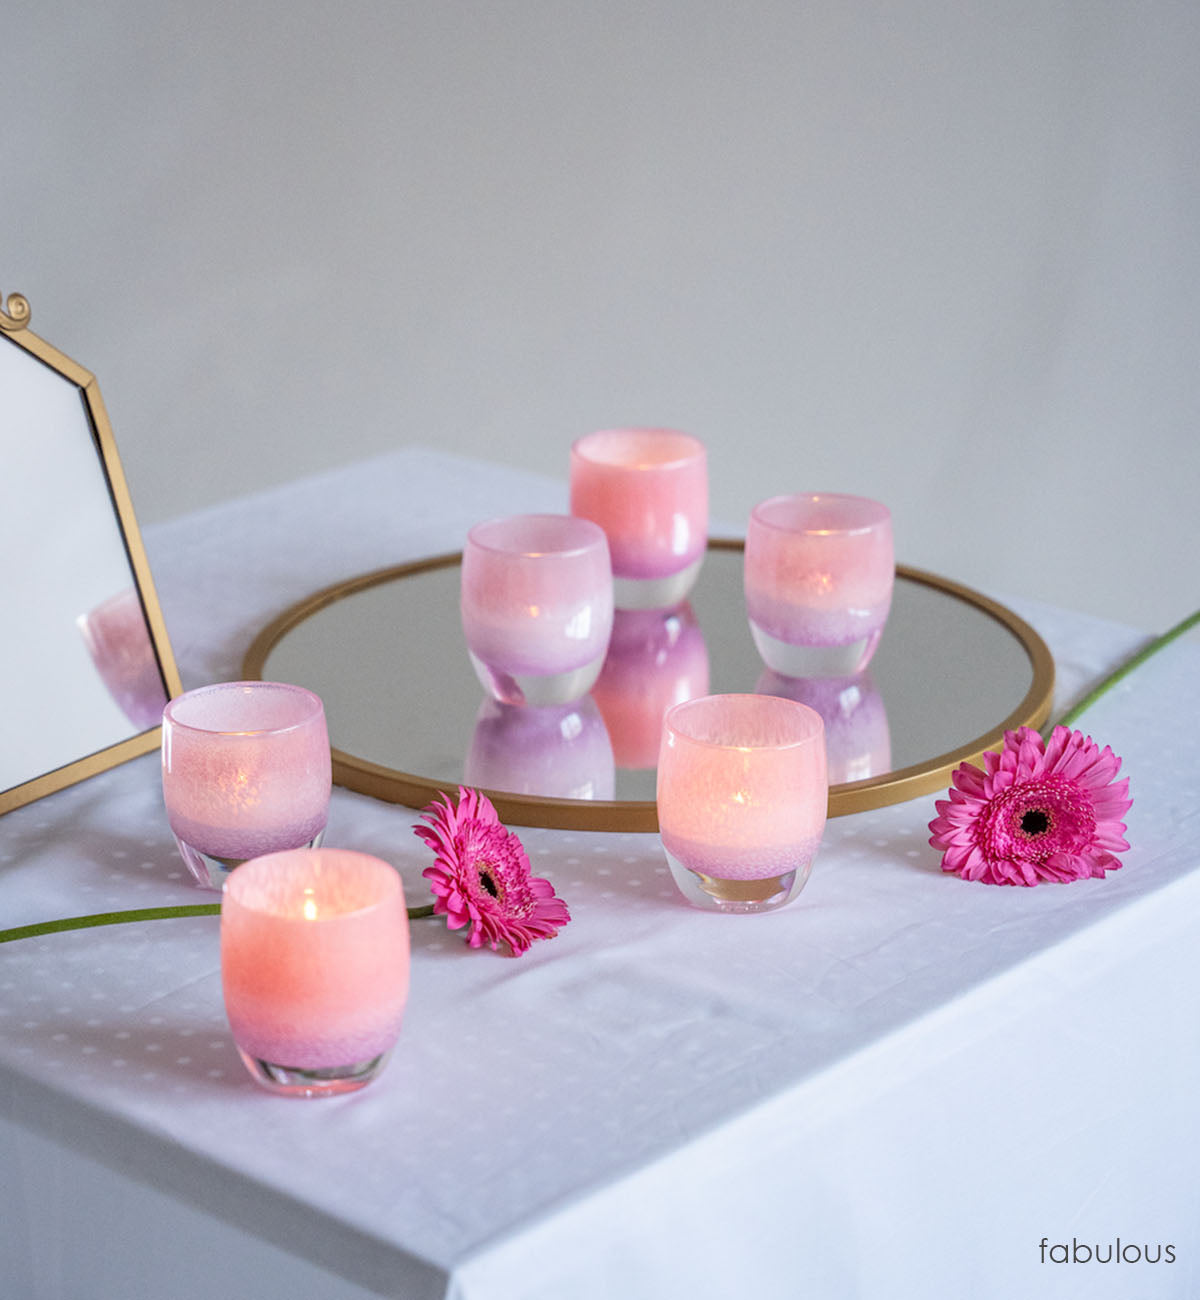 fabulous, pink textured hand-blown glass votive candle holder